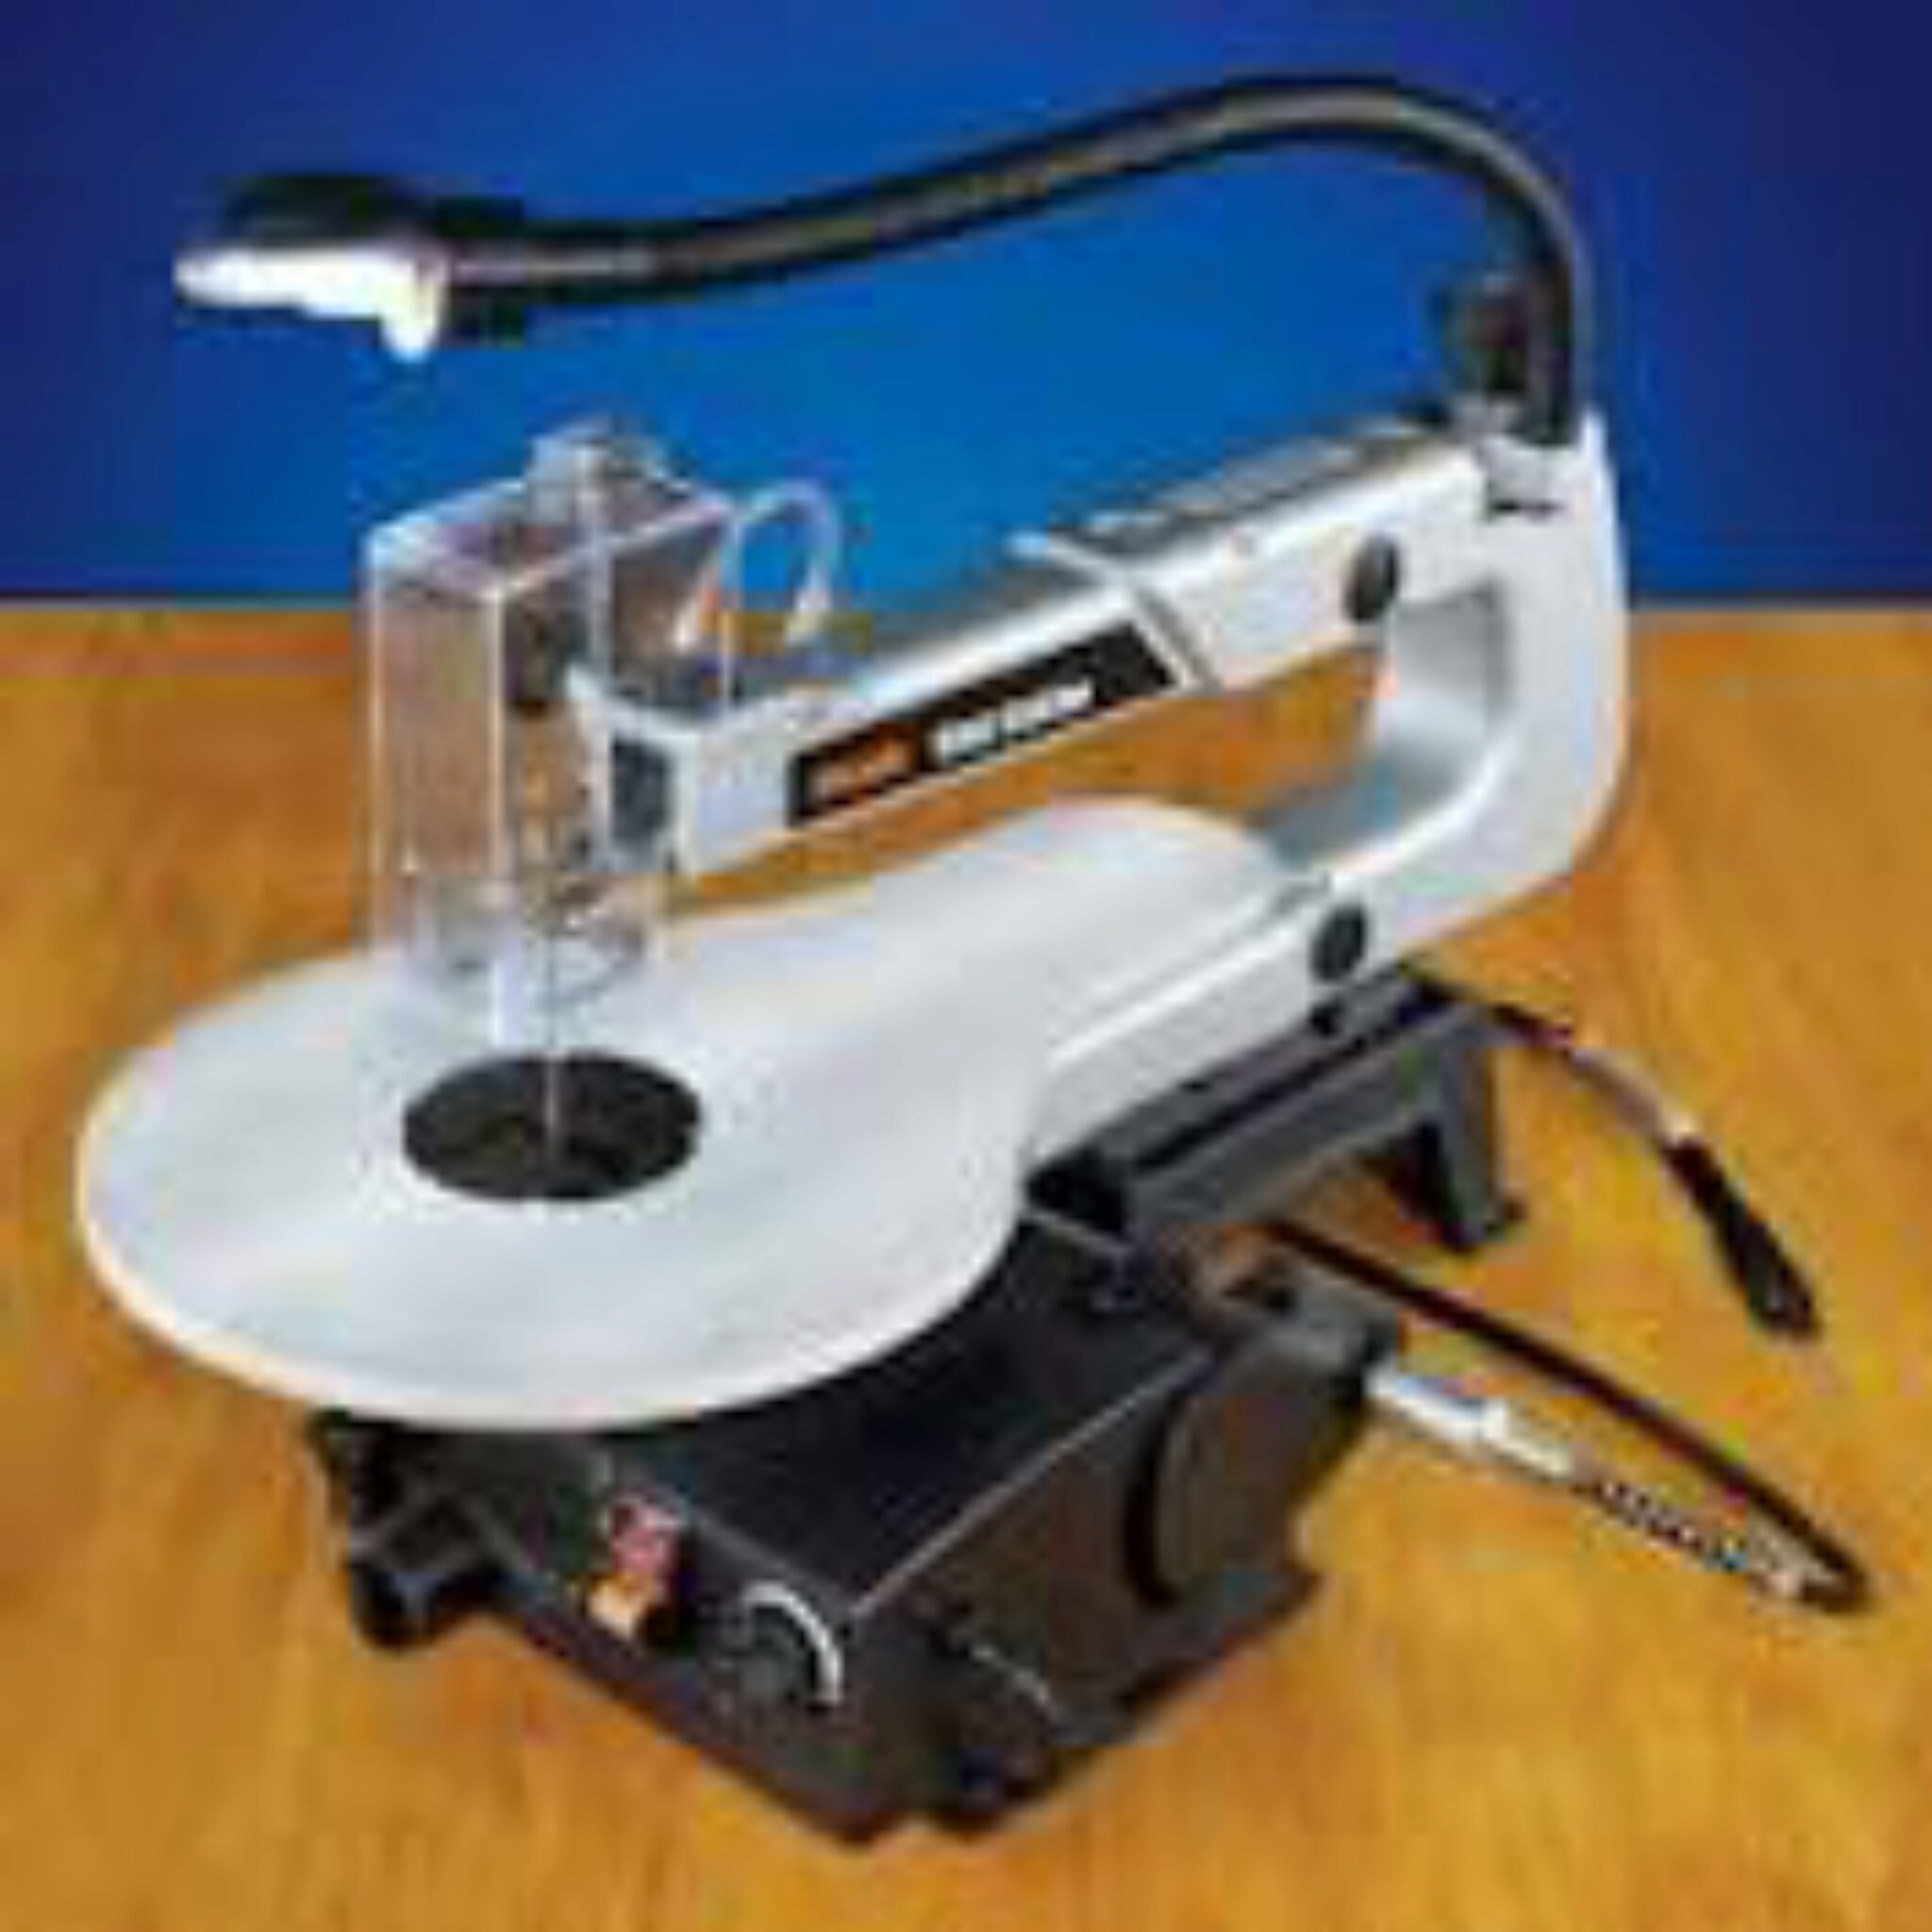 SKIL 3335 07 Scroll Saw With Light Review